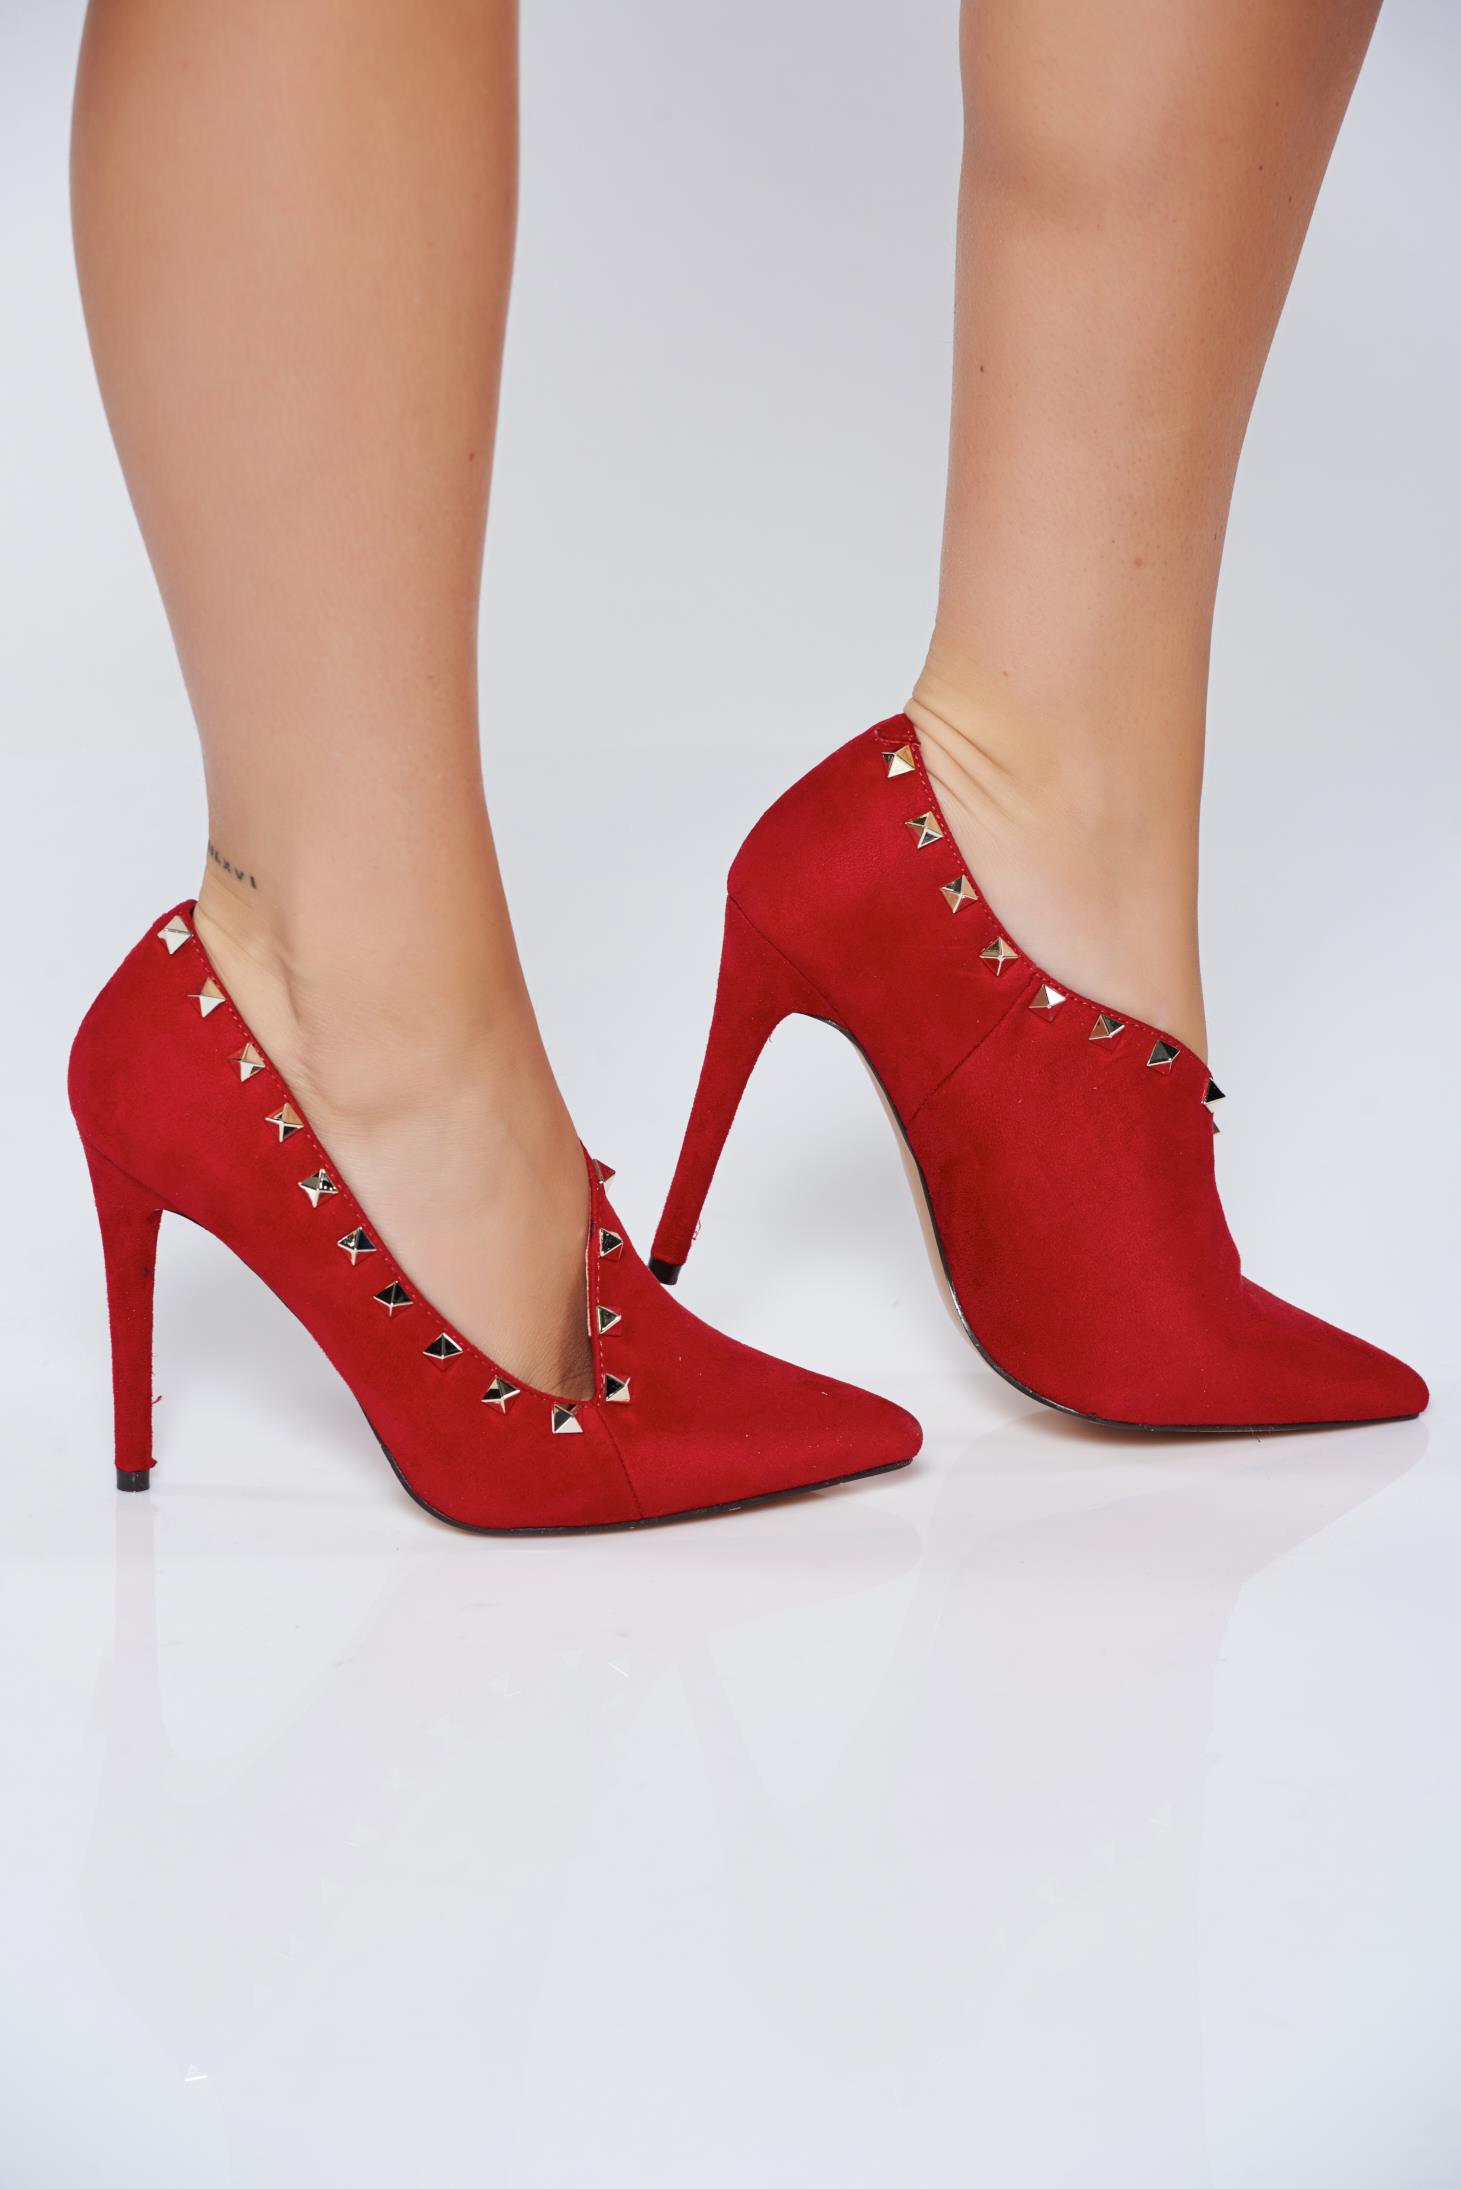 Red elegant slightly pointed toe tip shoes with metallic spikes